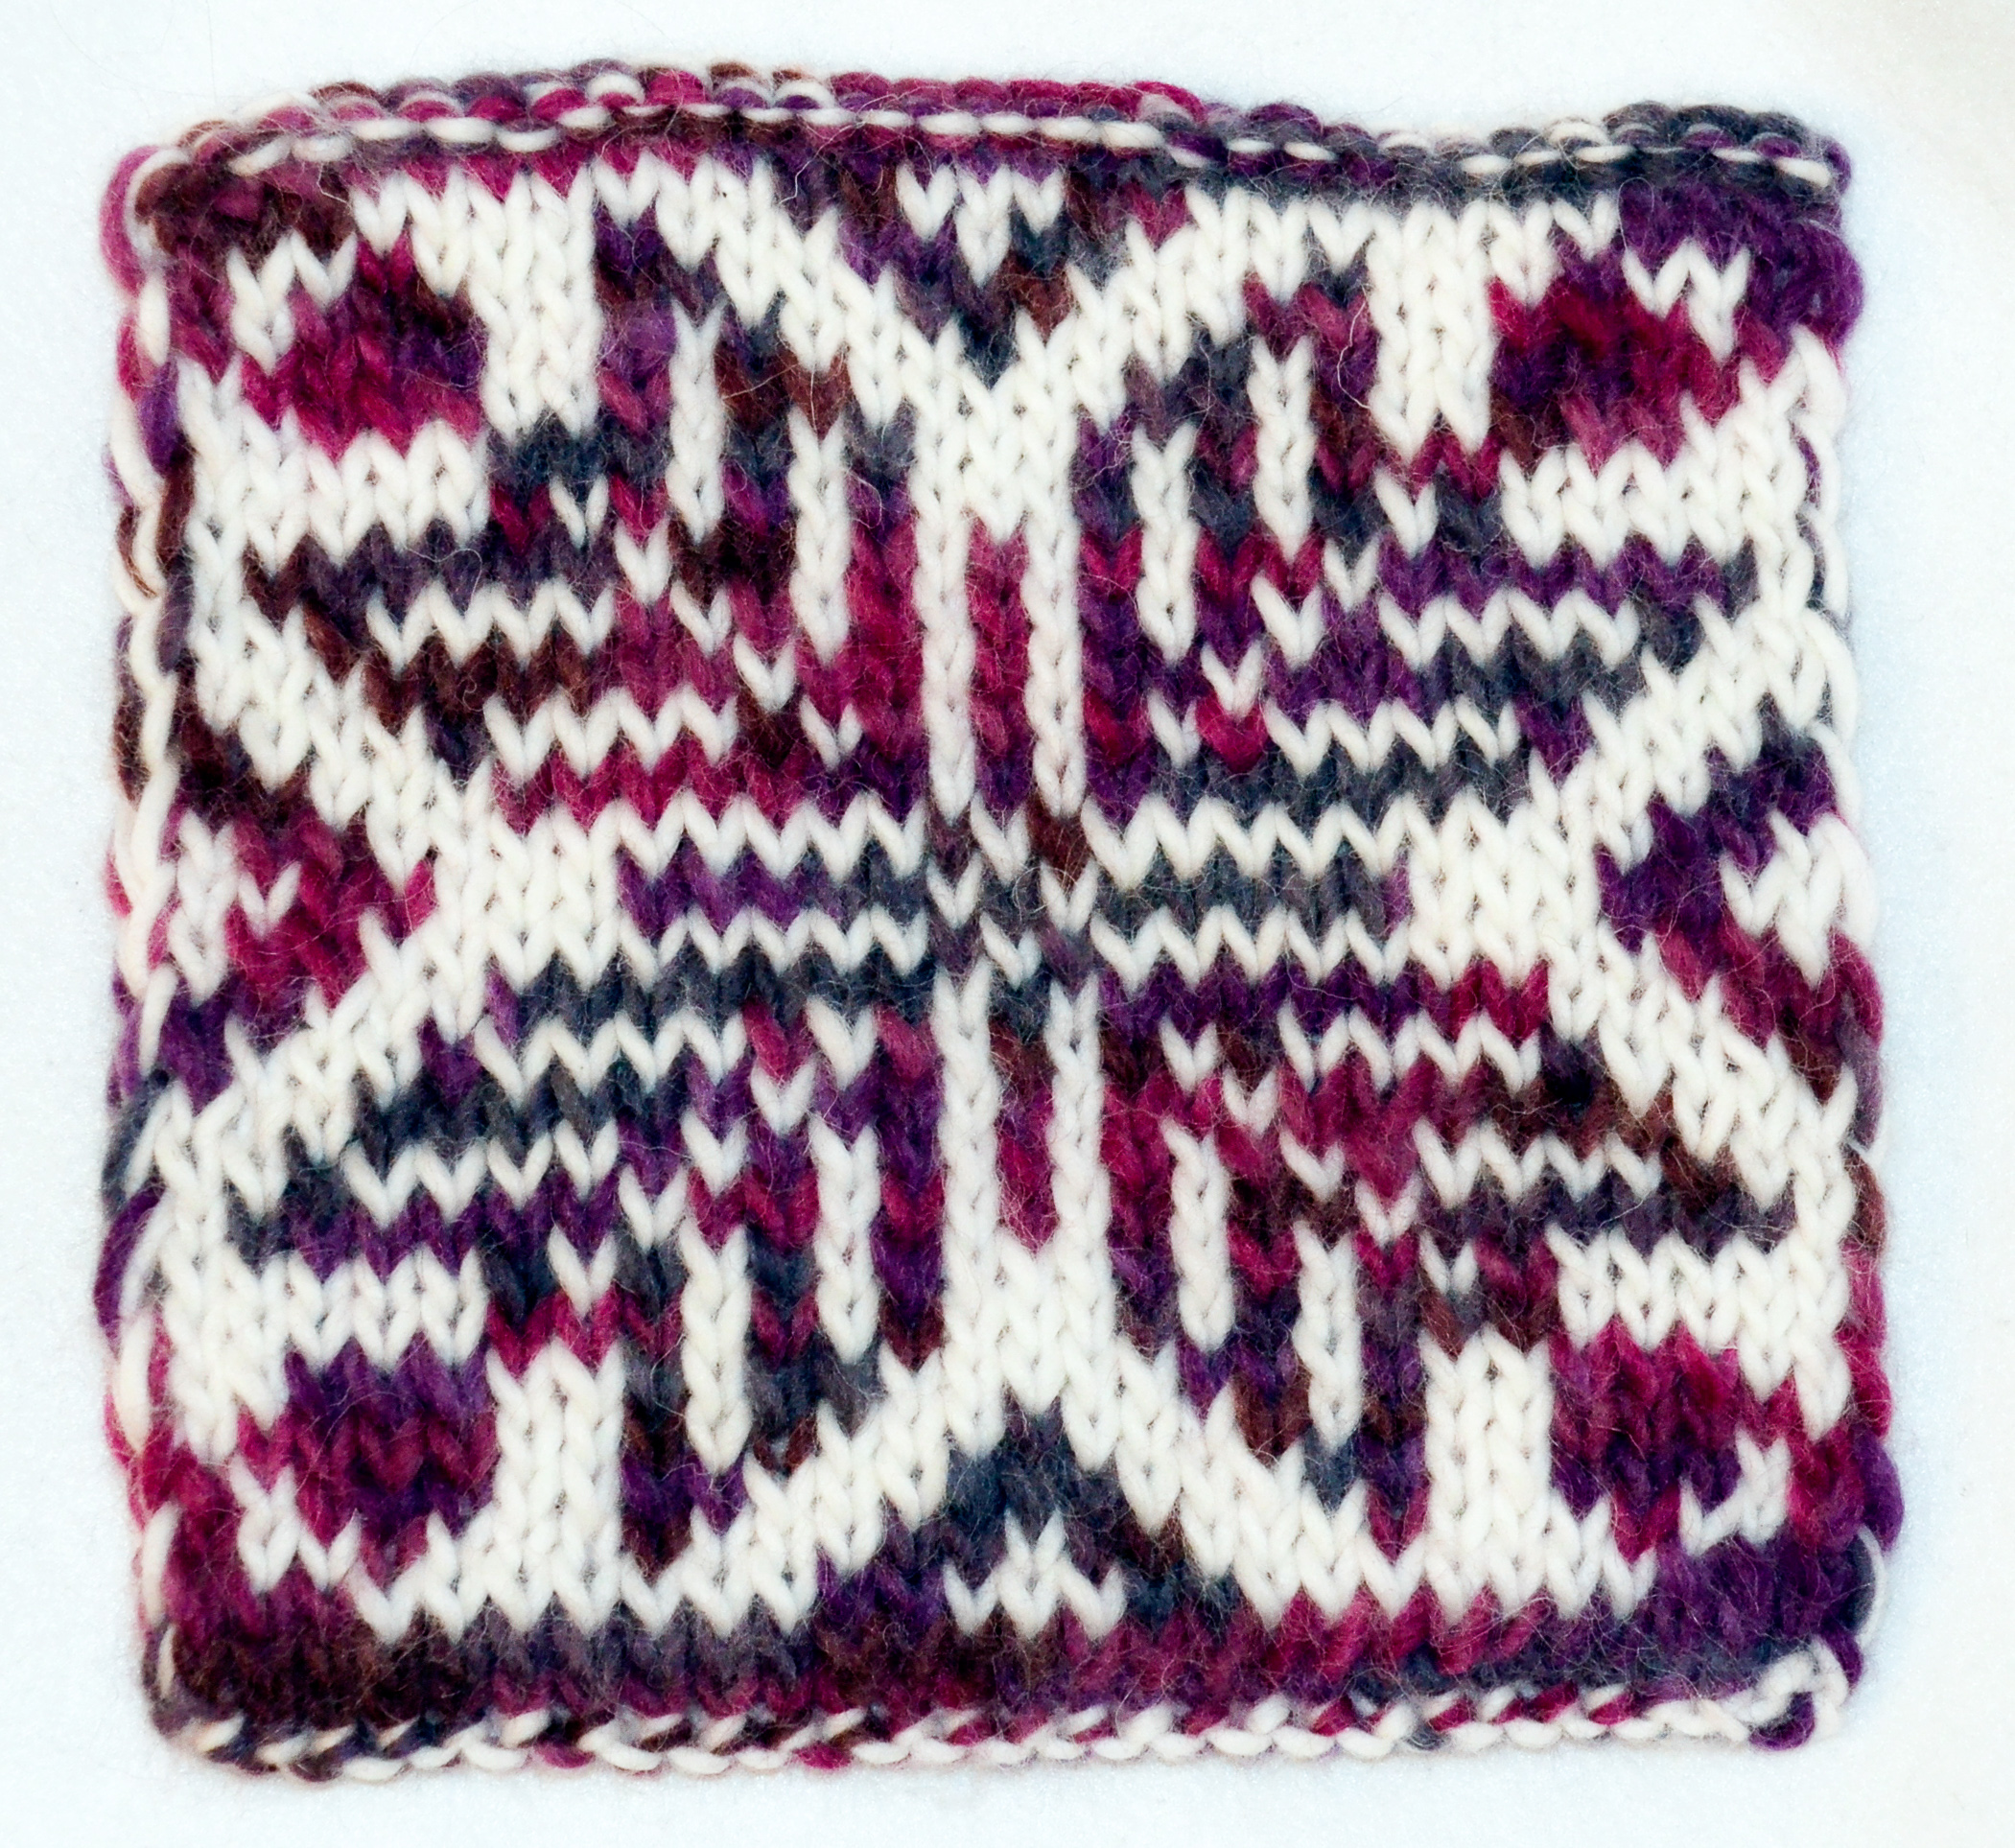 Double knit pattern - traditional motif other side